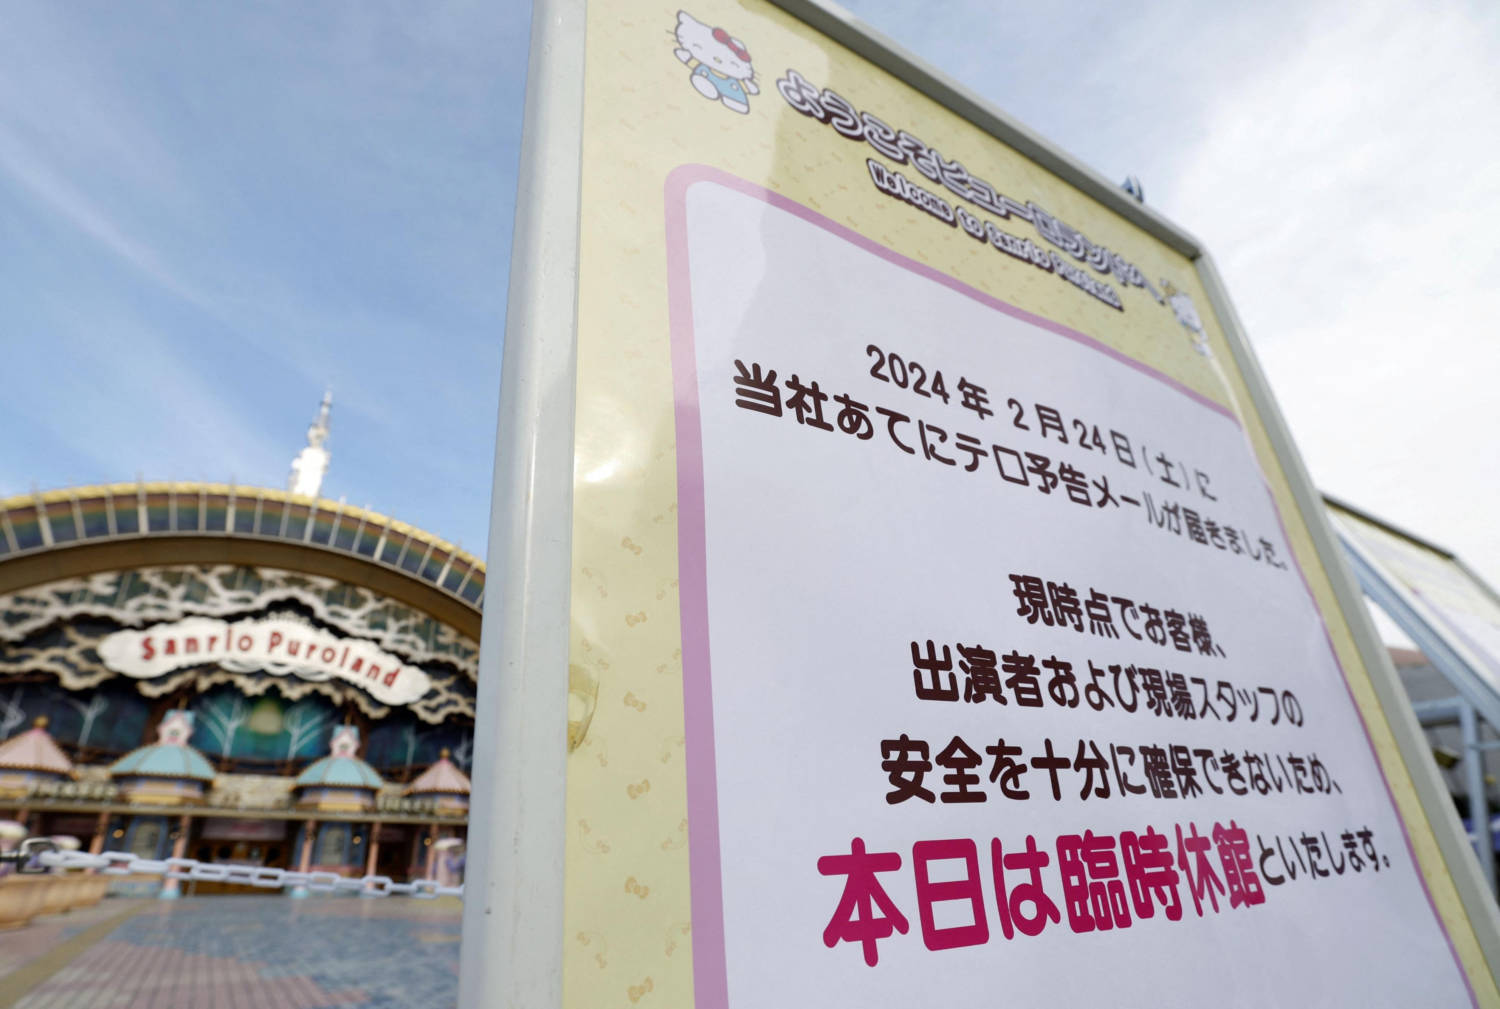 Notice Of Temporary Closure Is Displayed At The Entrance Of The Sanrio Puroland, A Theme Park Featuring The Hello Kitty Characters In Tokyo